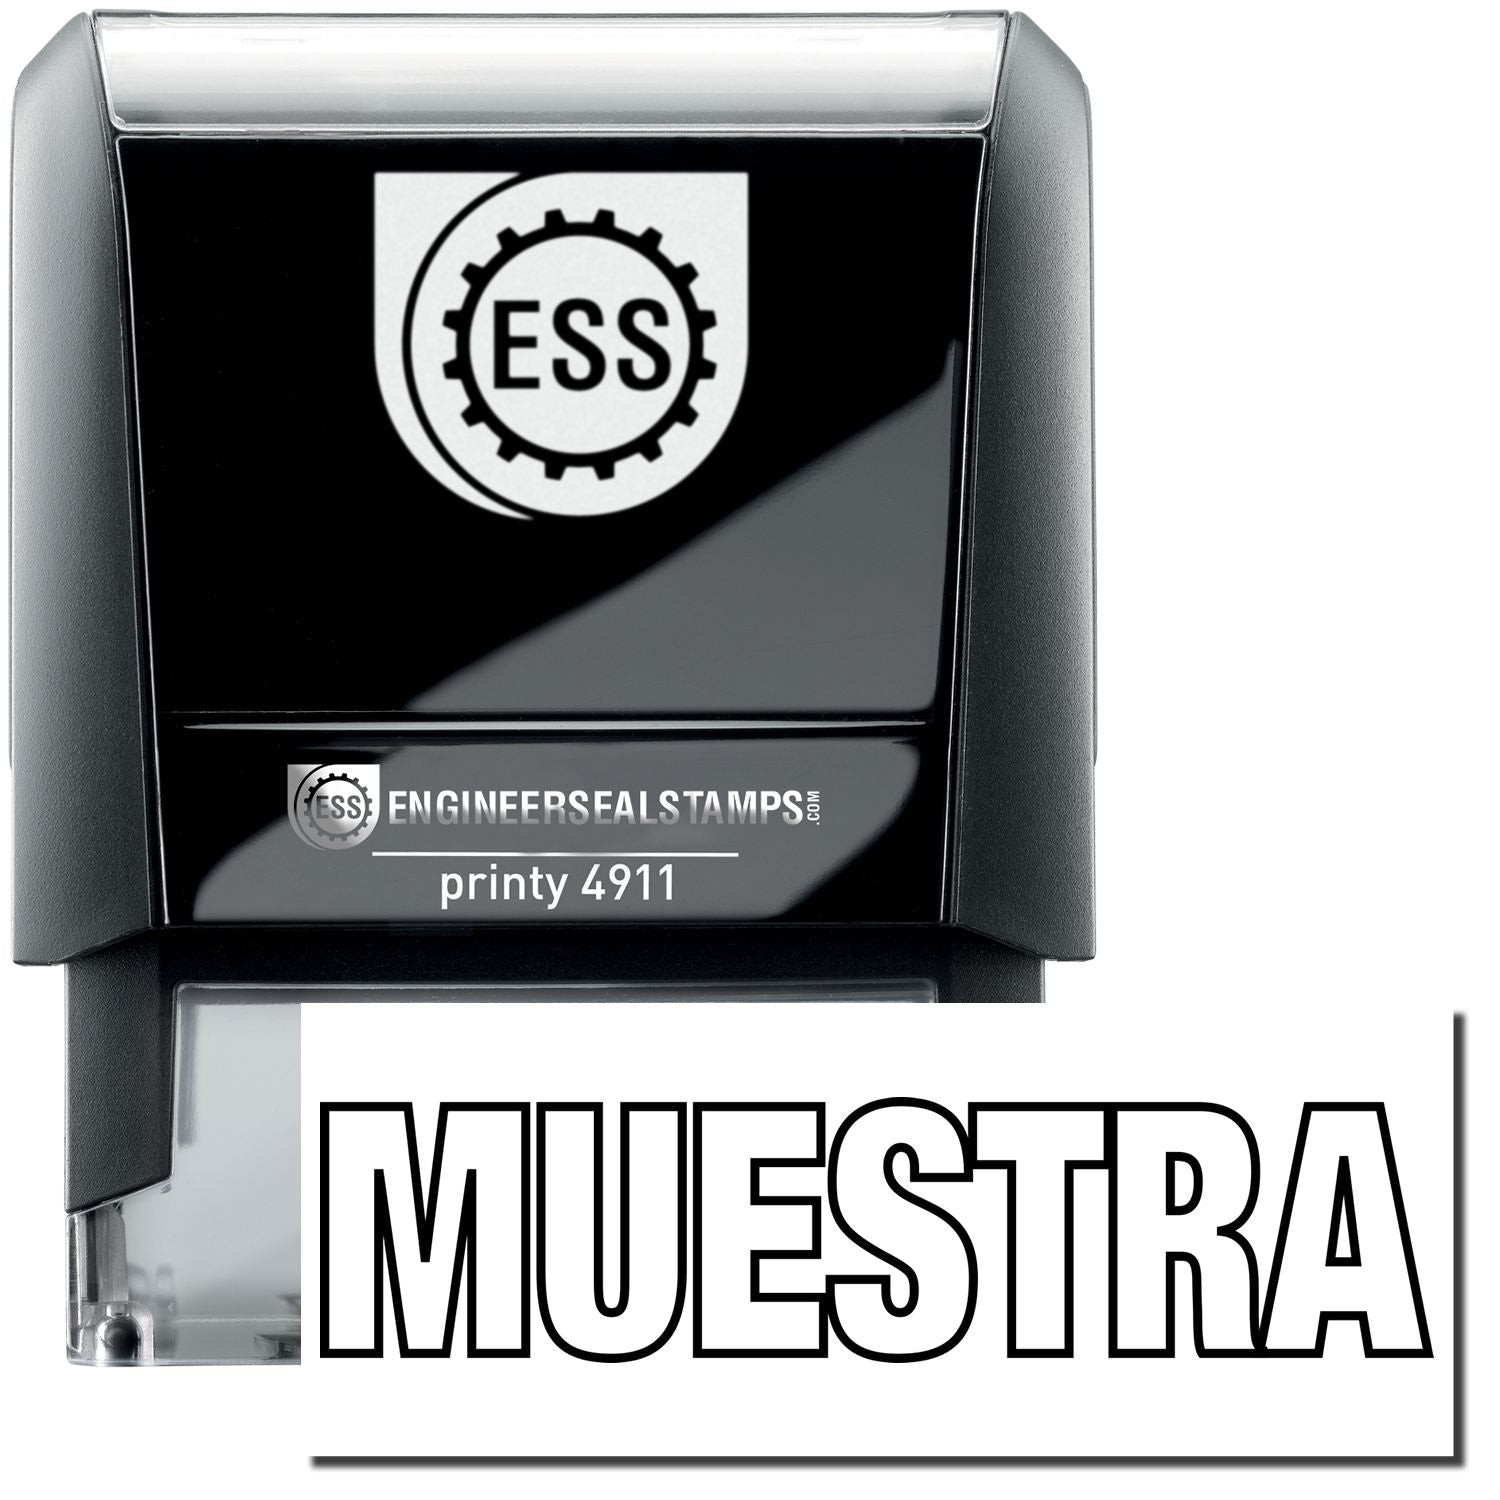 A self-inking stamp with a stamped image showing how the text "MUESTRA" in an outline style is displayed after stamping.